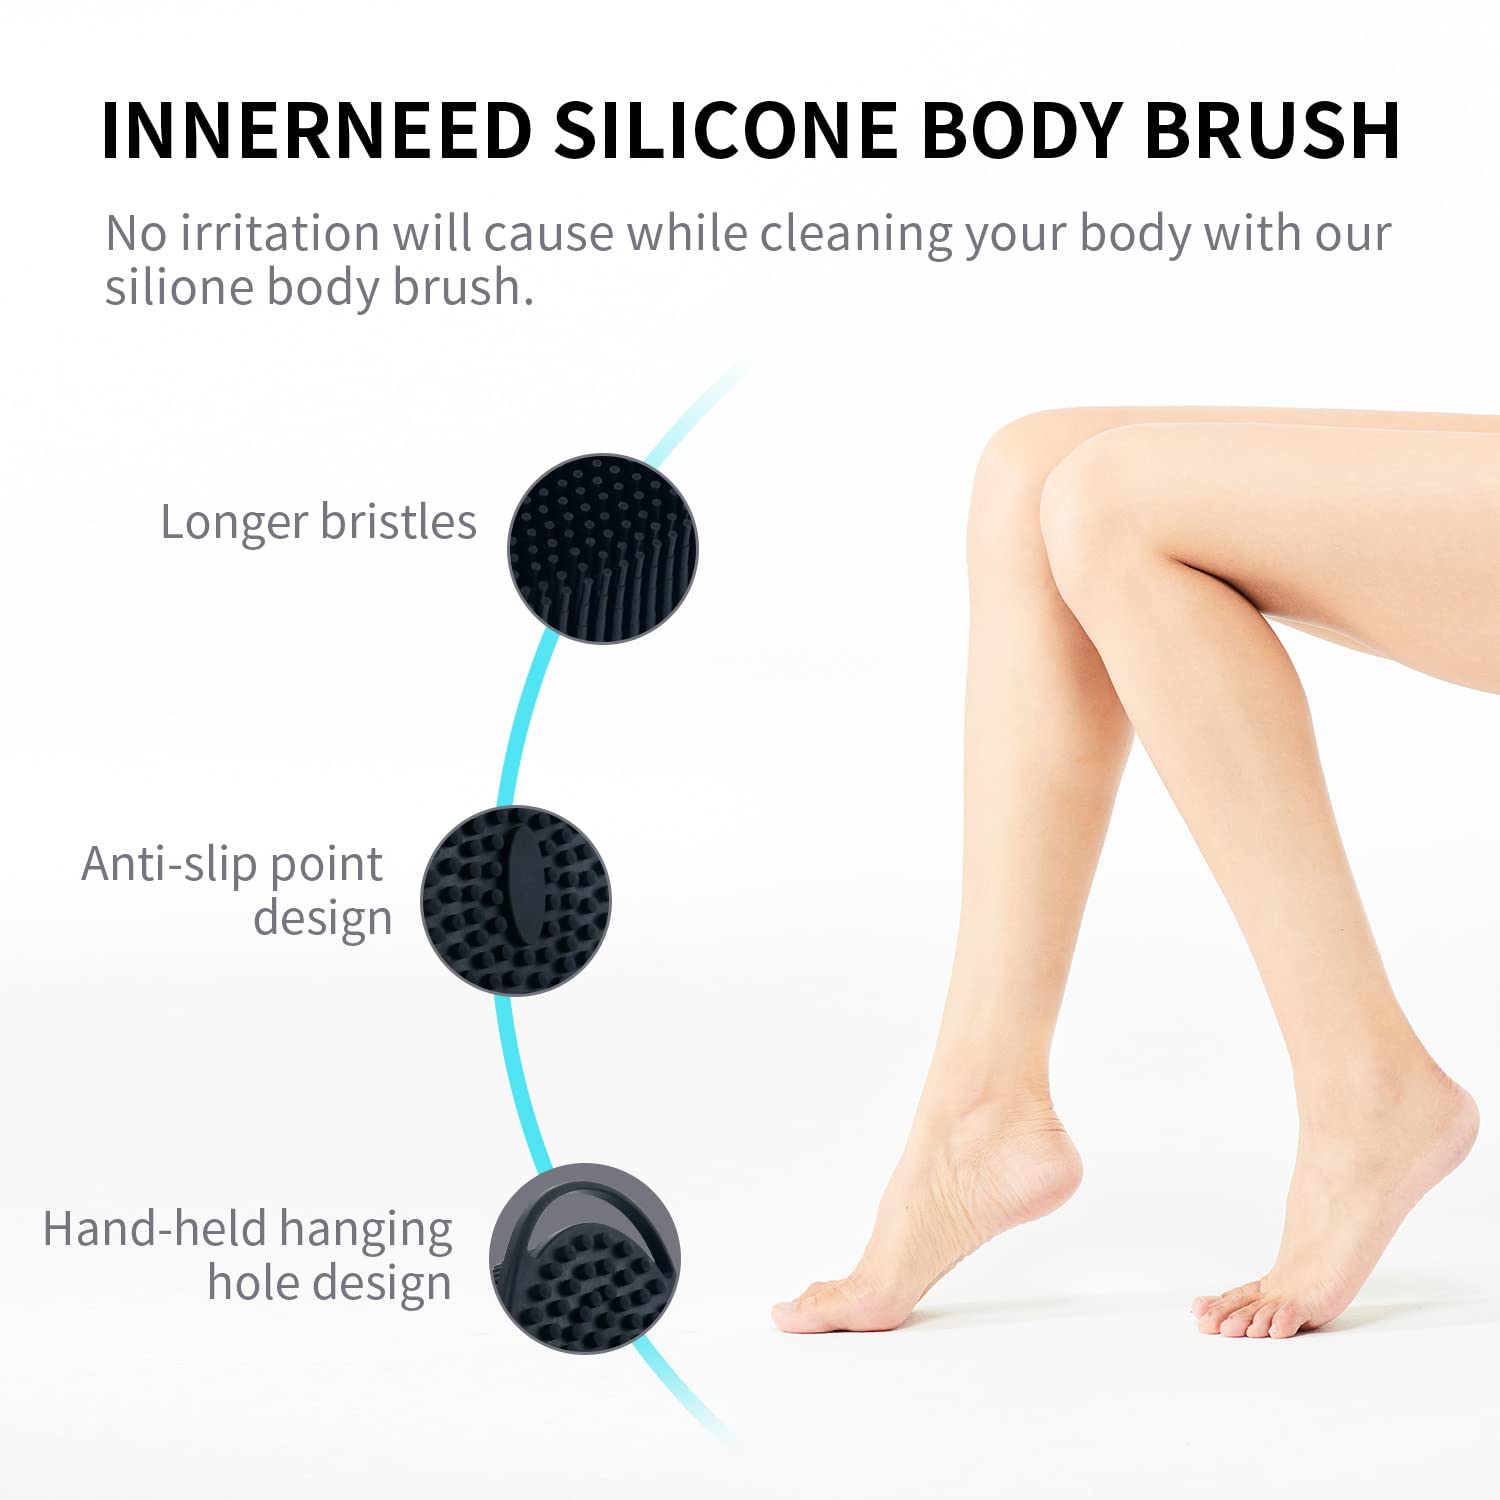 Silicone Body Scrubber, Silicone Loofah, Body Wash Scrubber, Body Scrub Brush, Body Scrubbers for Use in Shower, Silicone Loofah Body Scrubber, Exfoliating Body Scrubber Mens Women, Gifts for Men Dad